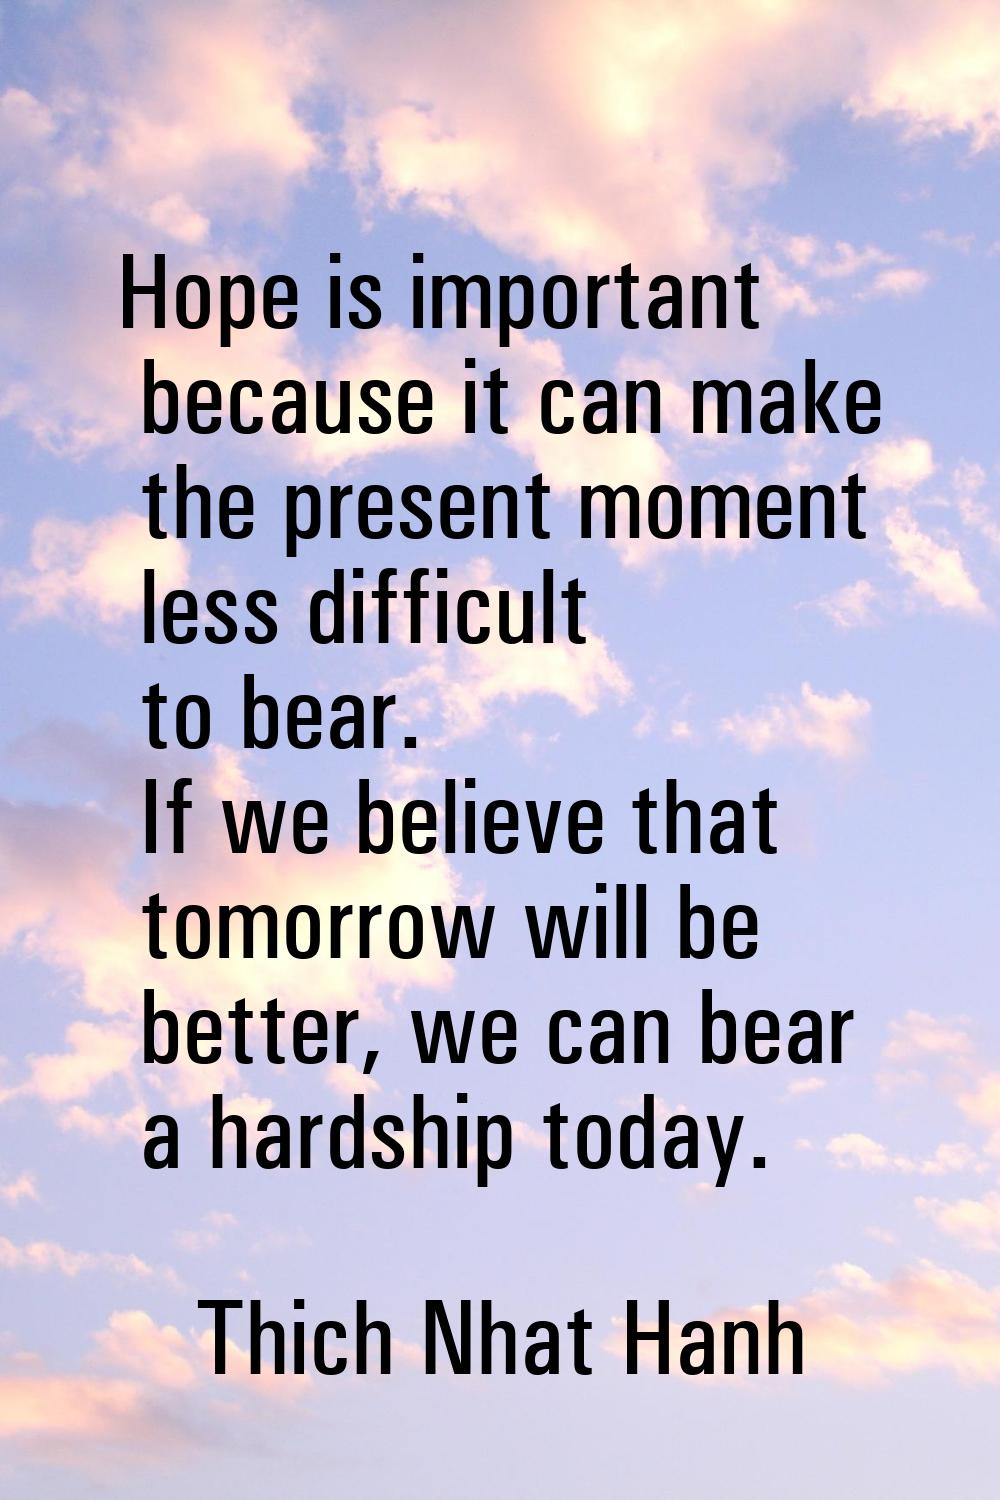 Hope is important because it can make the present moment less difficult to bear. If we believe that